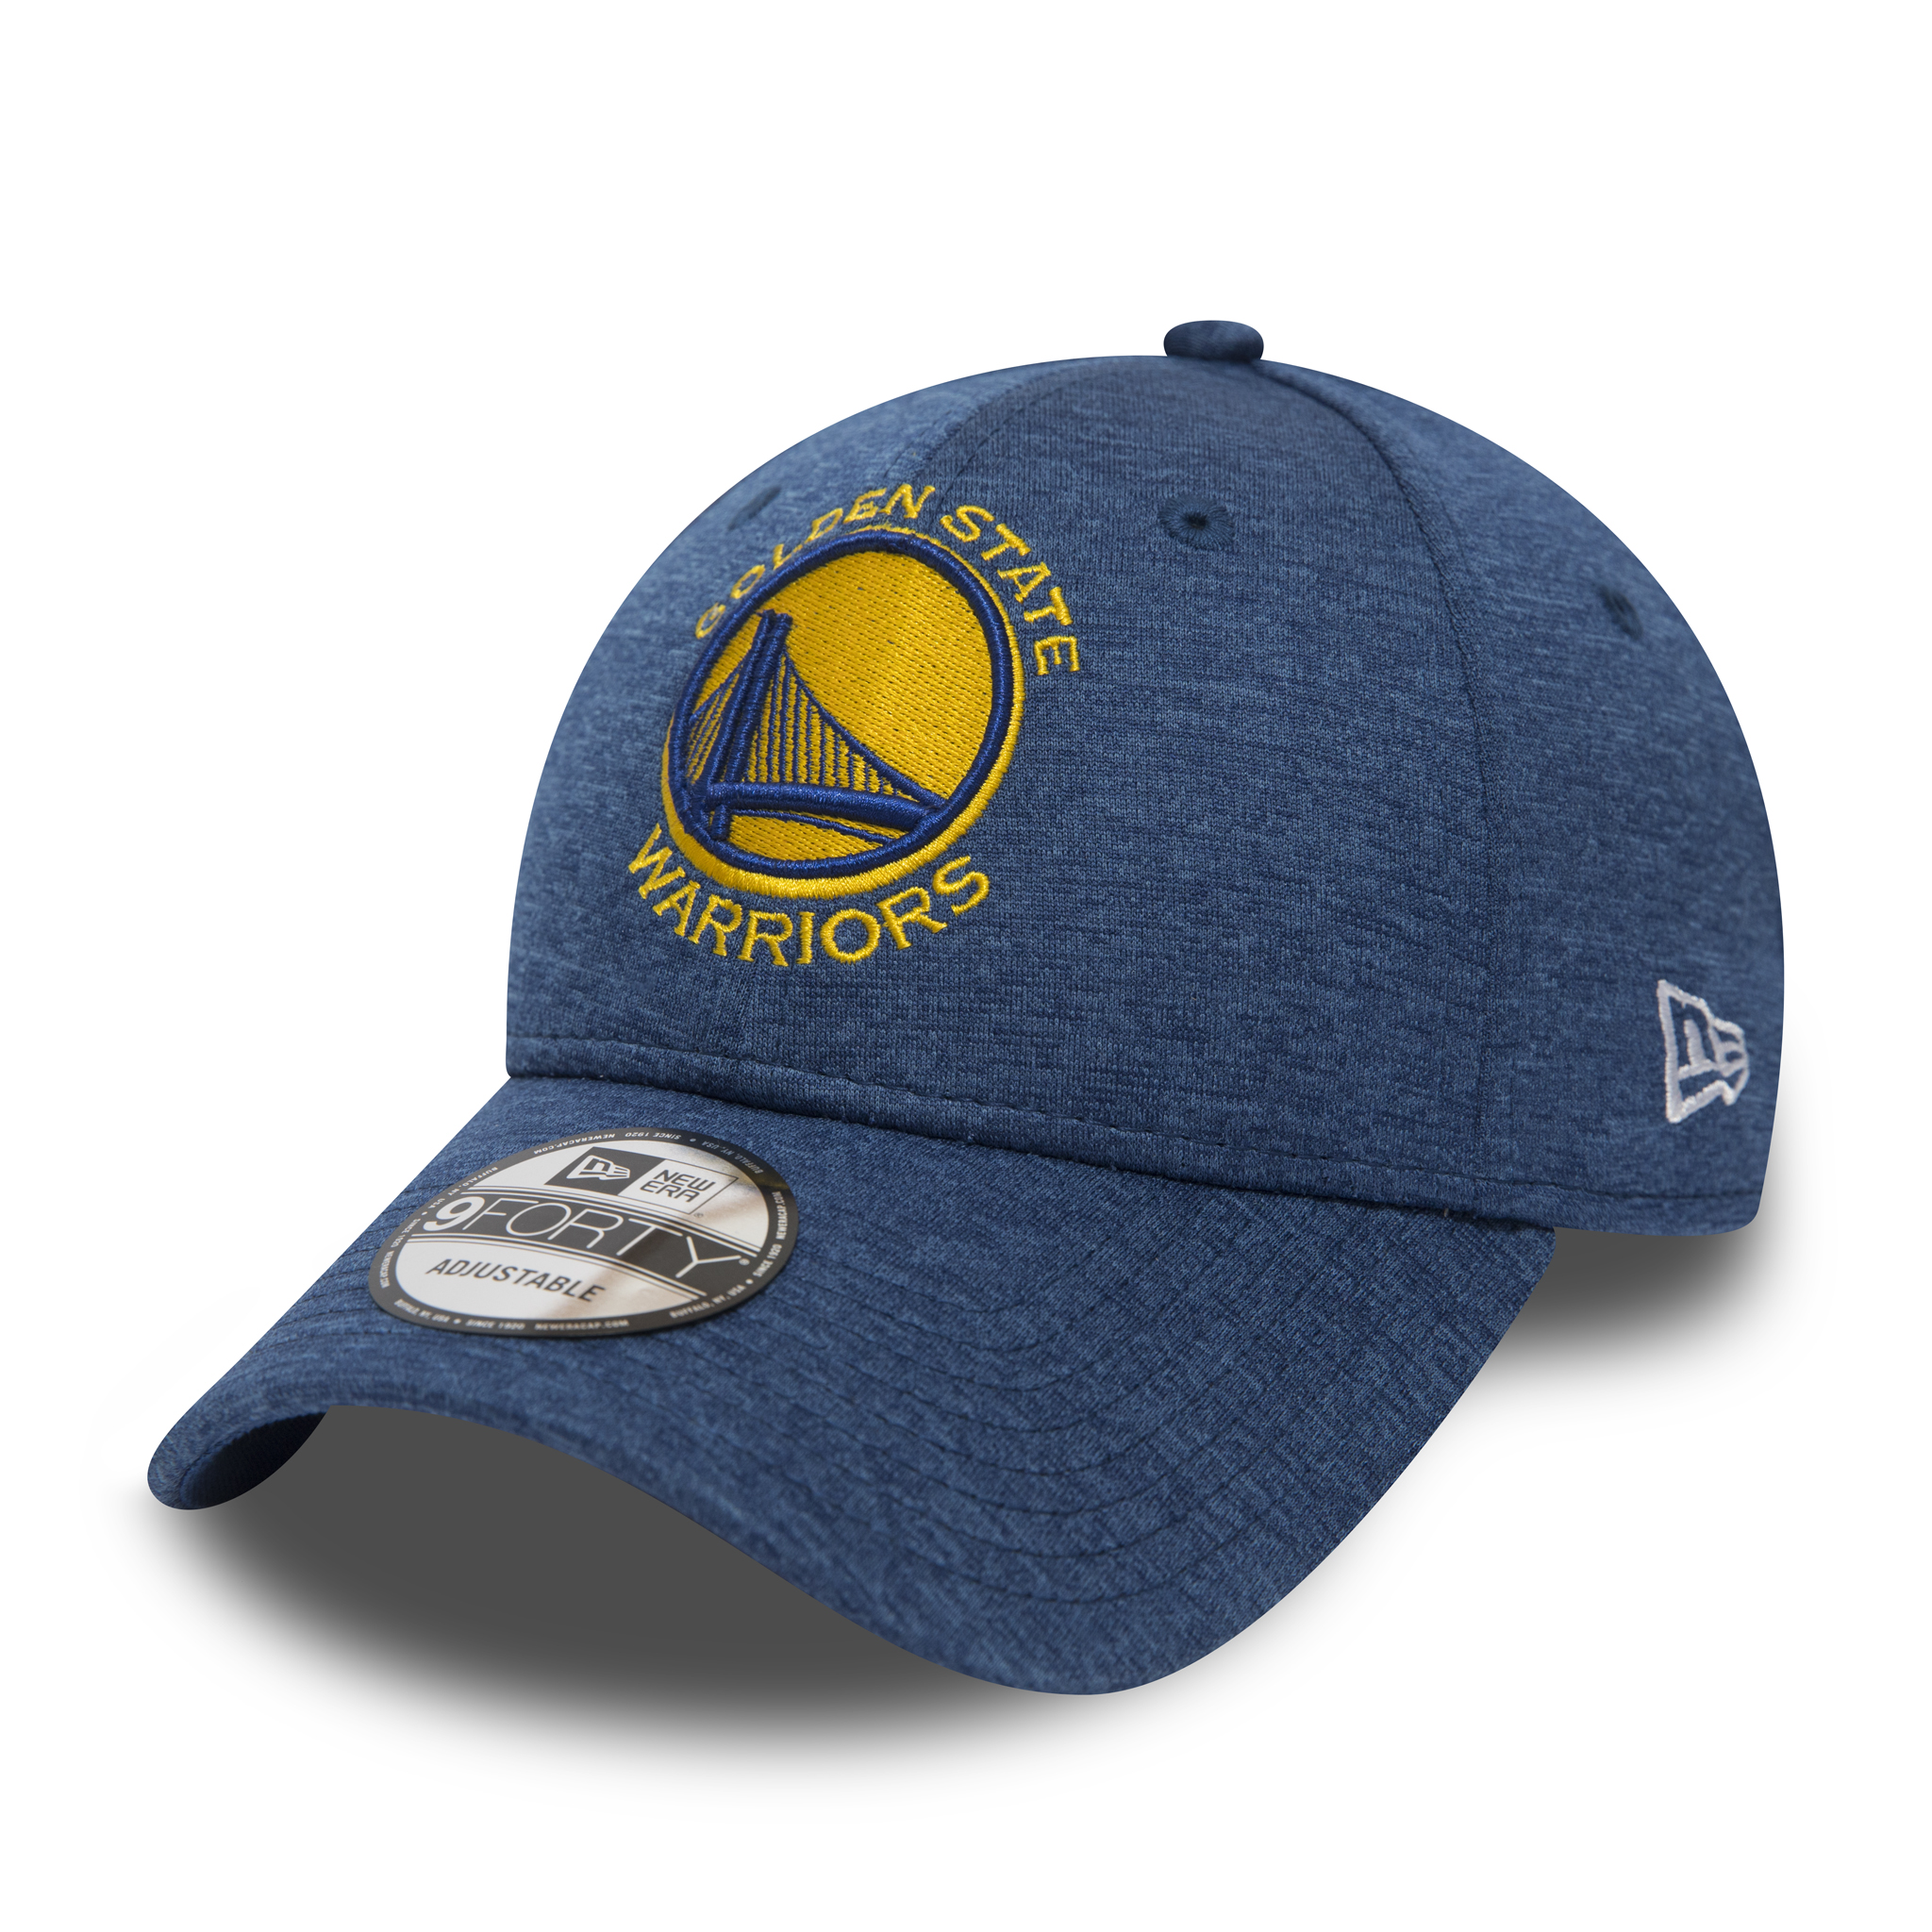 Cappellino 9FORTY in jersey Golden State Warriors blu